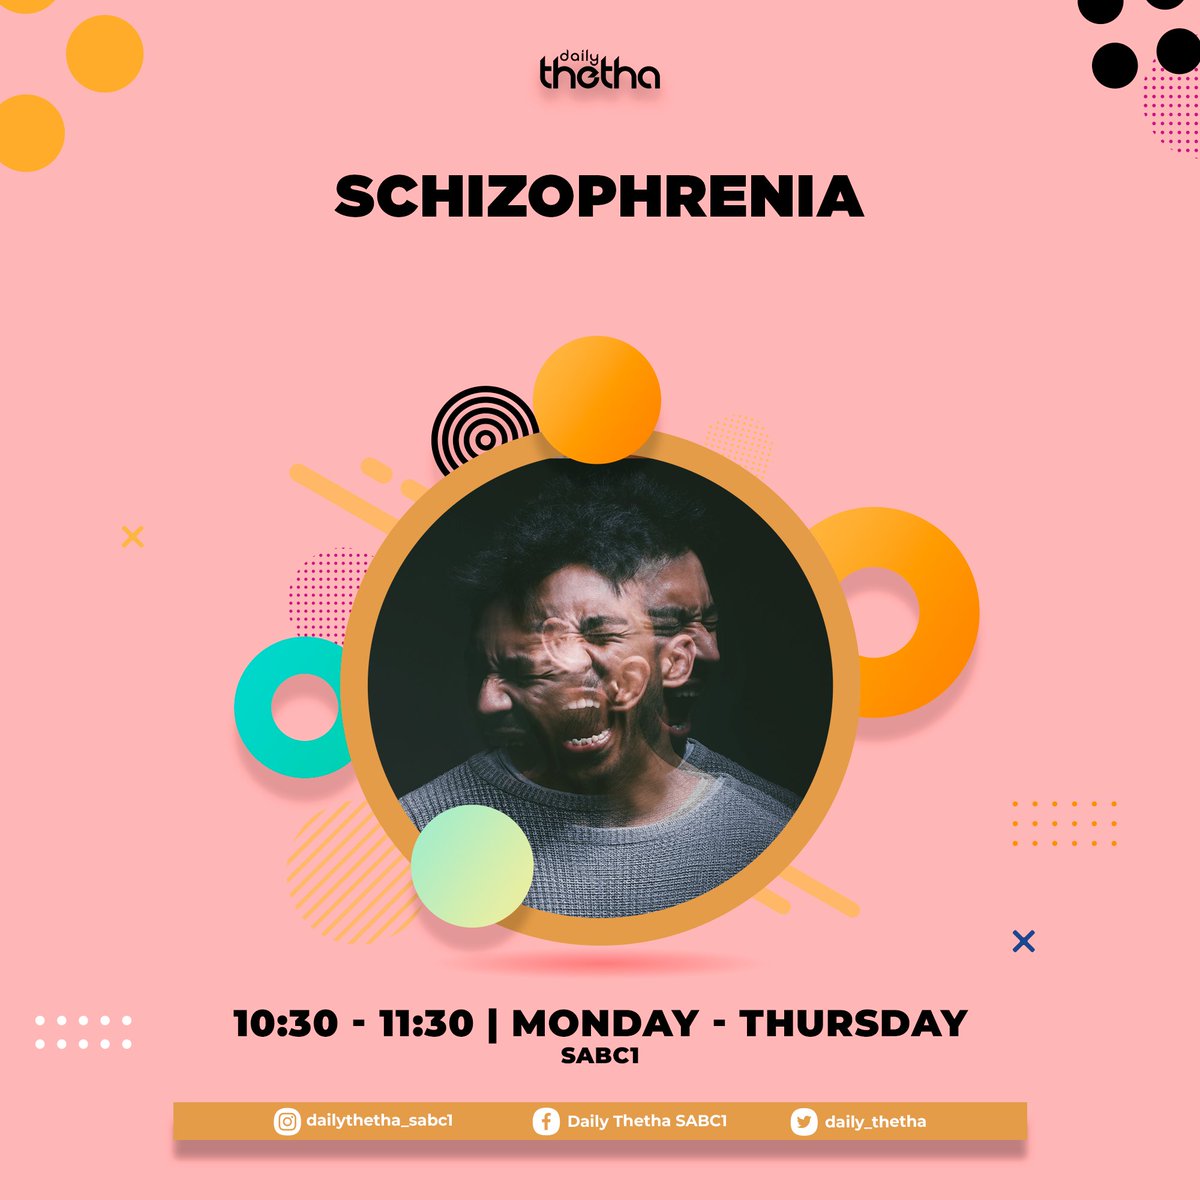 Schizophrenia is a serious mental illness that affects how a person thinks, feels, and behaves.
People diagnosed with this mental condition may seem to have lost touch with reality.

Join the conversation live on Daily Thetha from 10h30 on SABC1.
#SABCEducation #DailyThetha